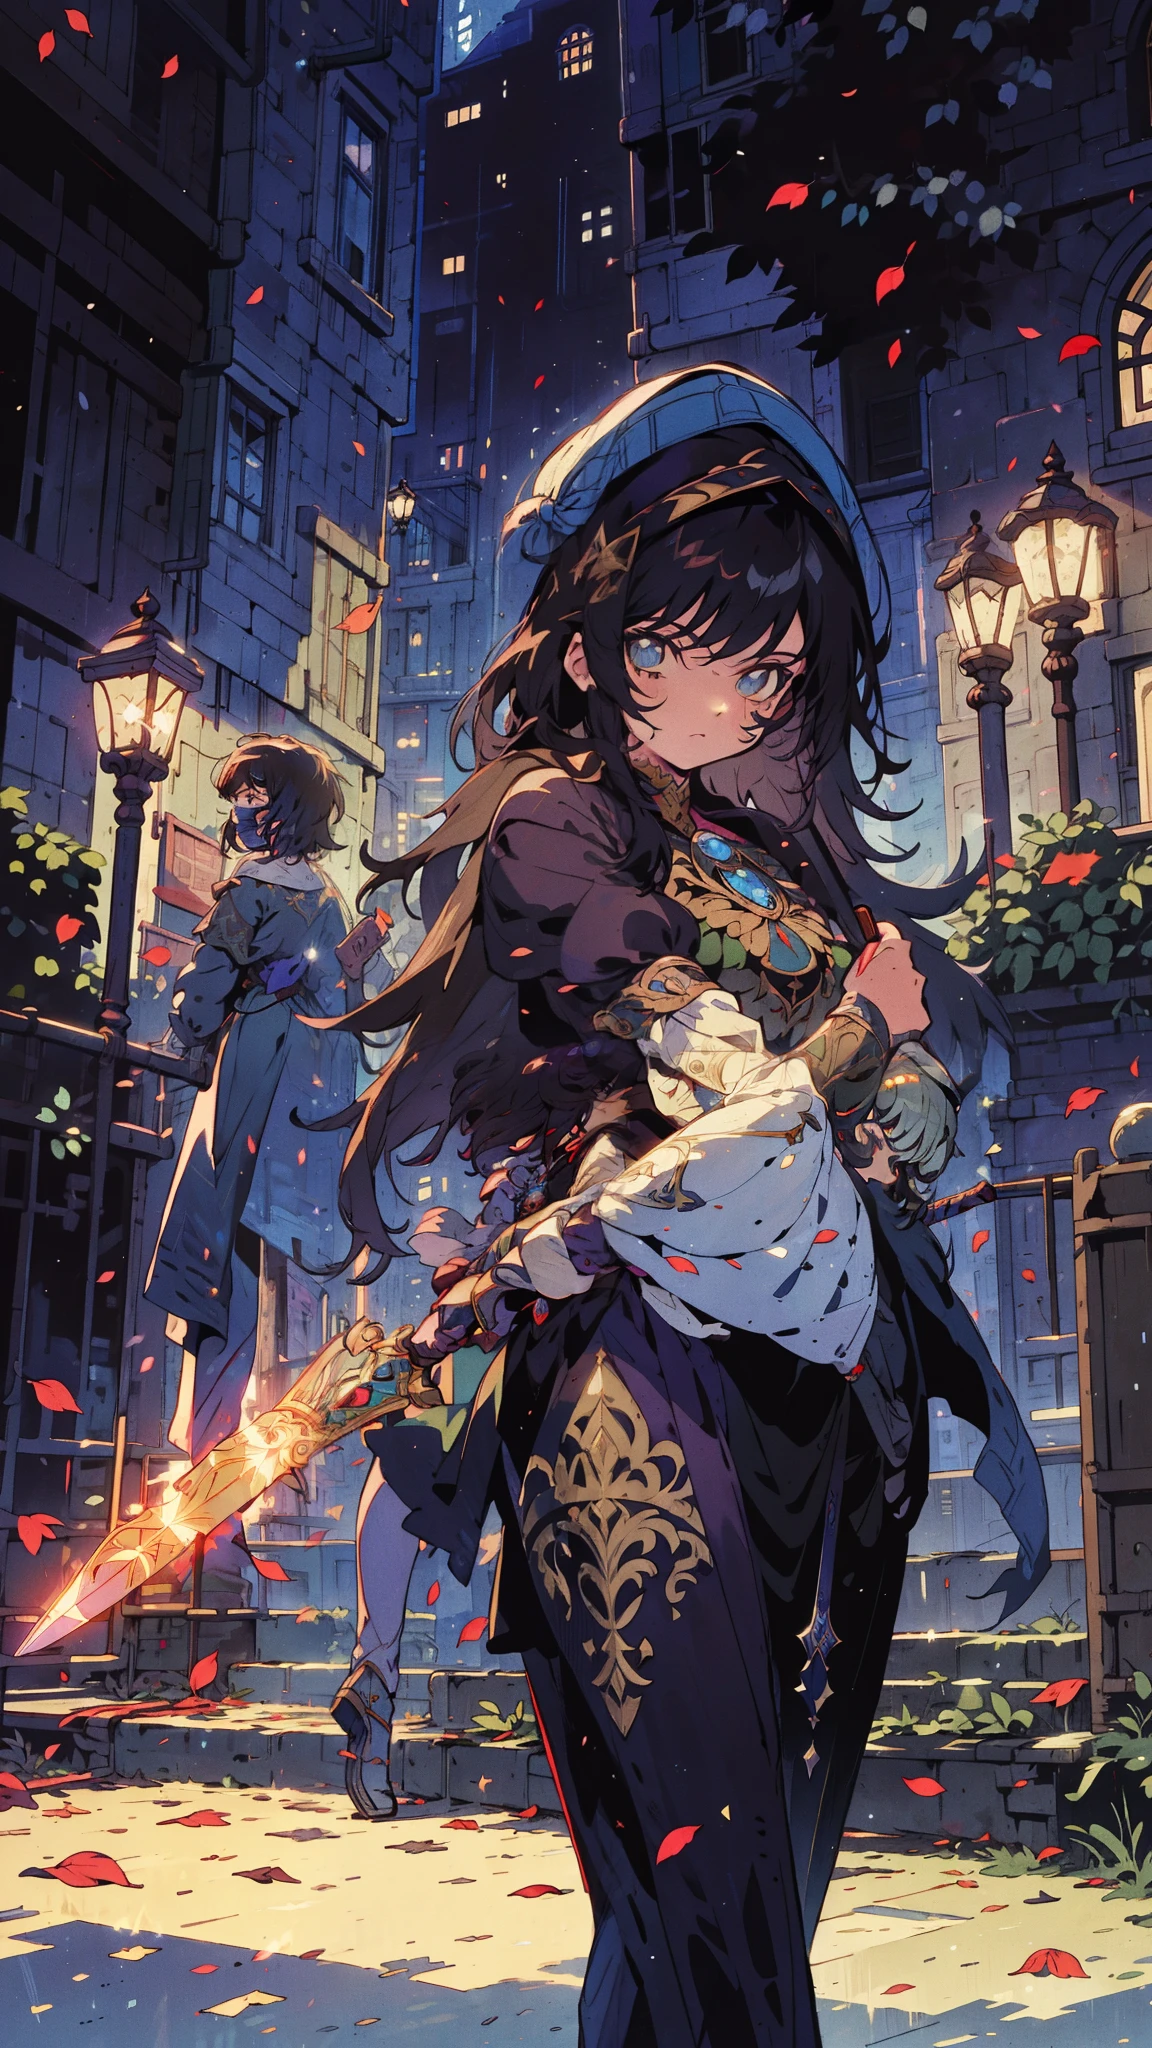 A solo teenager girl dressed in modern clothing, wielding a glowing dagger, posing, walking through a city street at night, with glittering fairy tale elements integrated into the scene. The street is lined with masked ball attendees and falling leaves. The style is Pre-Raphaelite art blended with urban fantasy. Dark, mystical, detailed